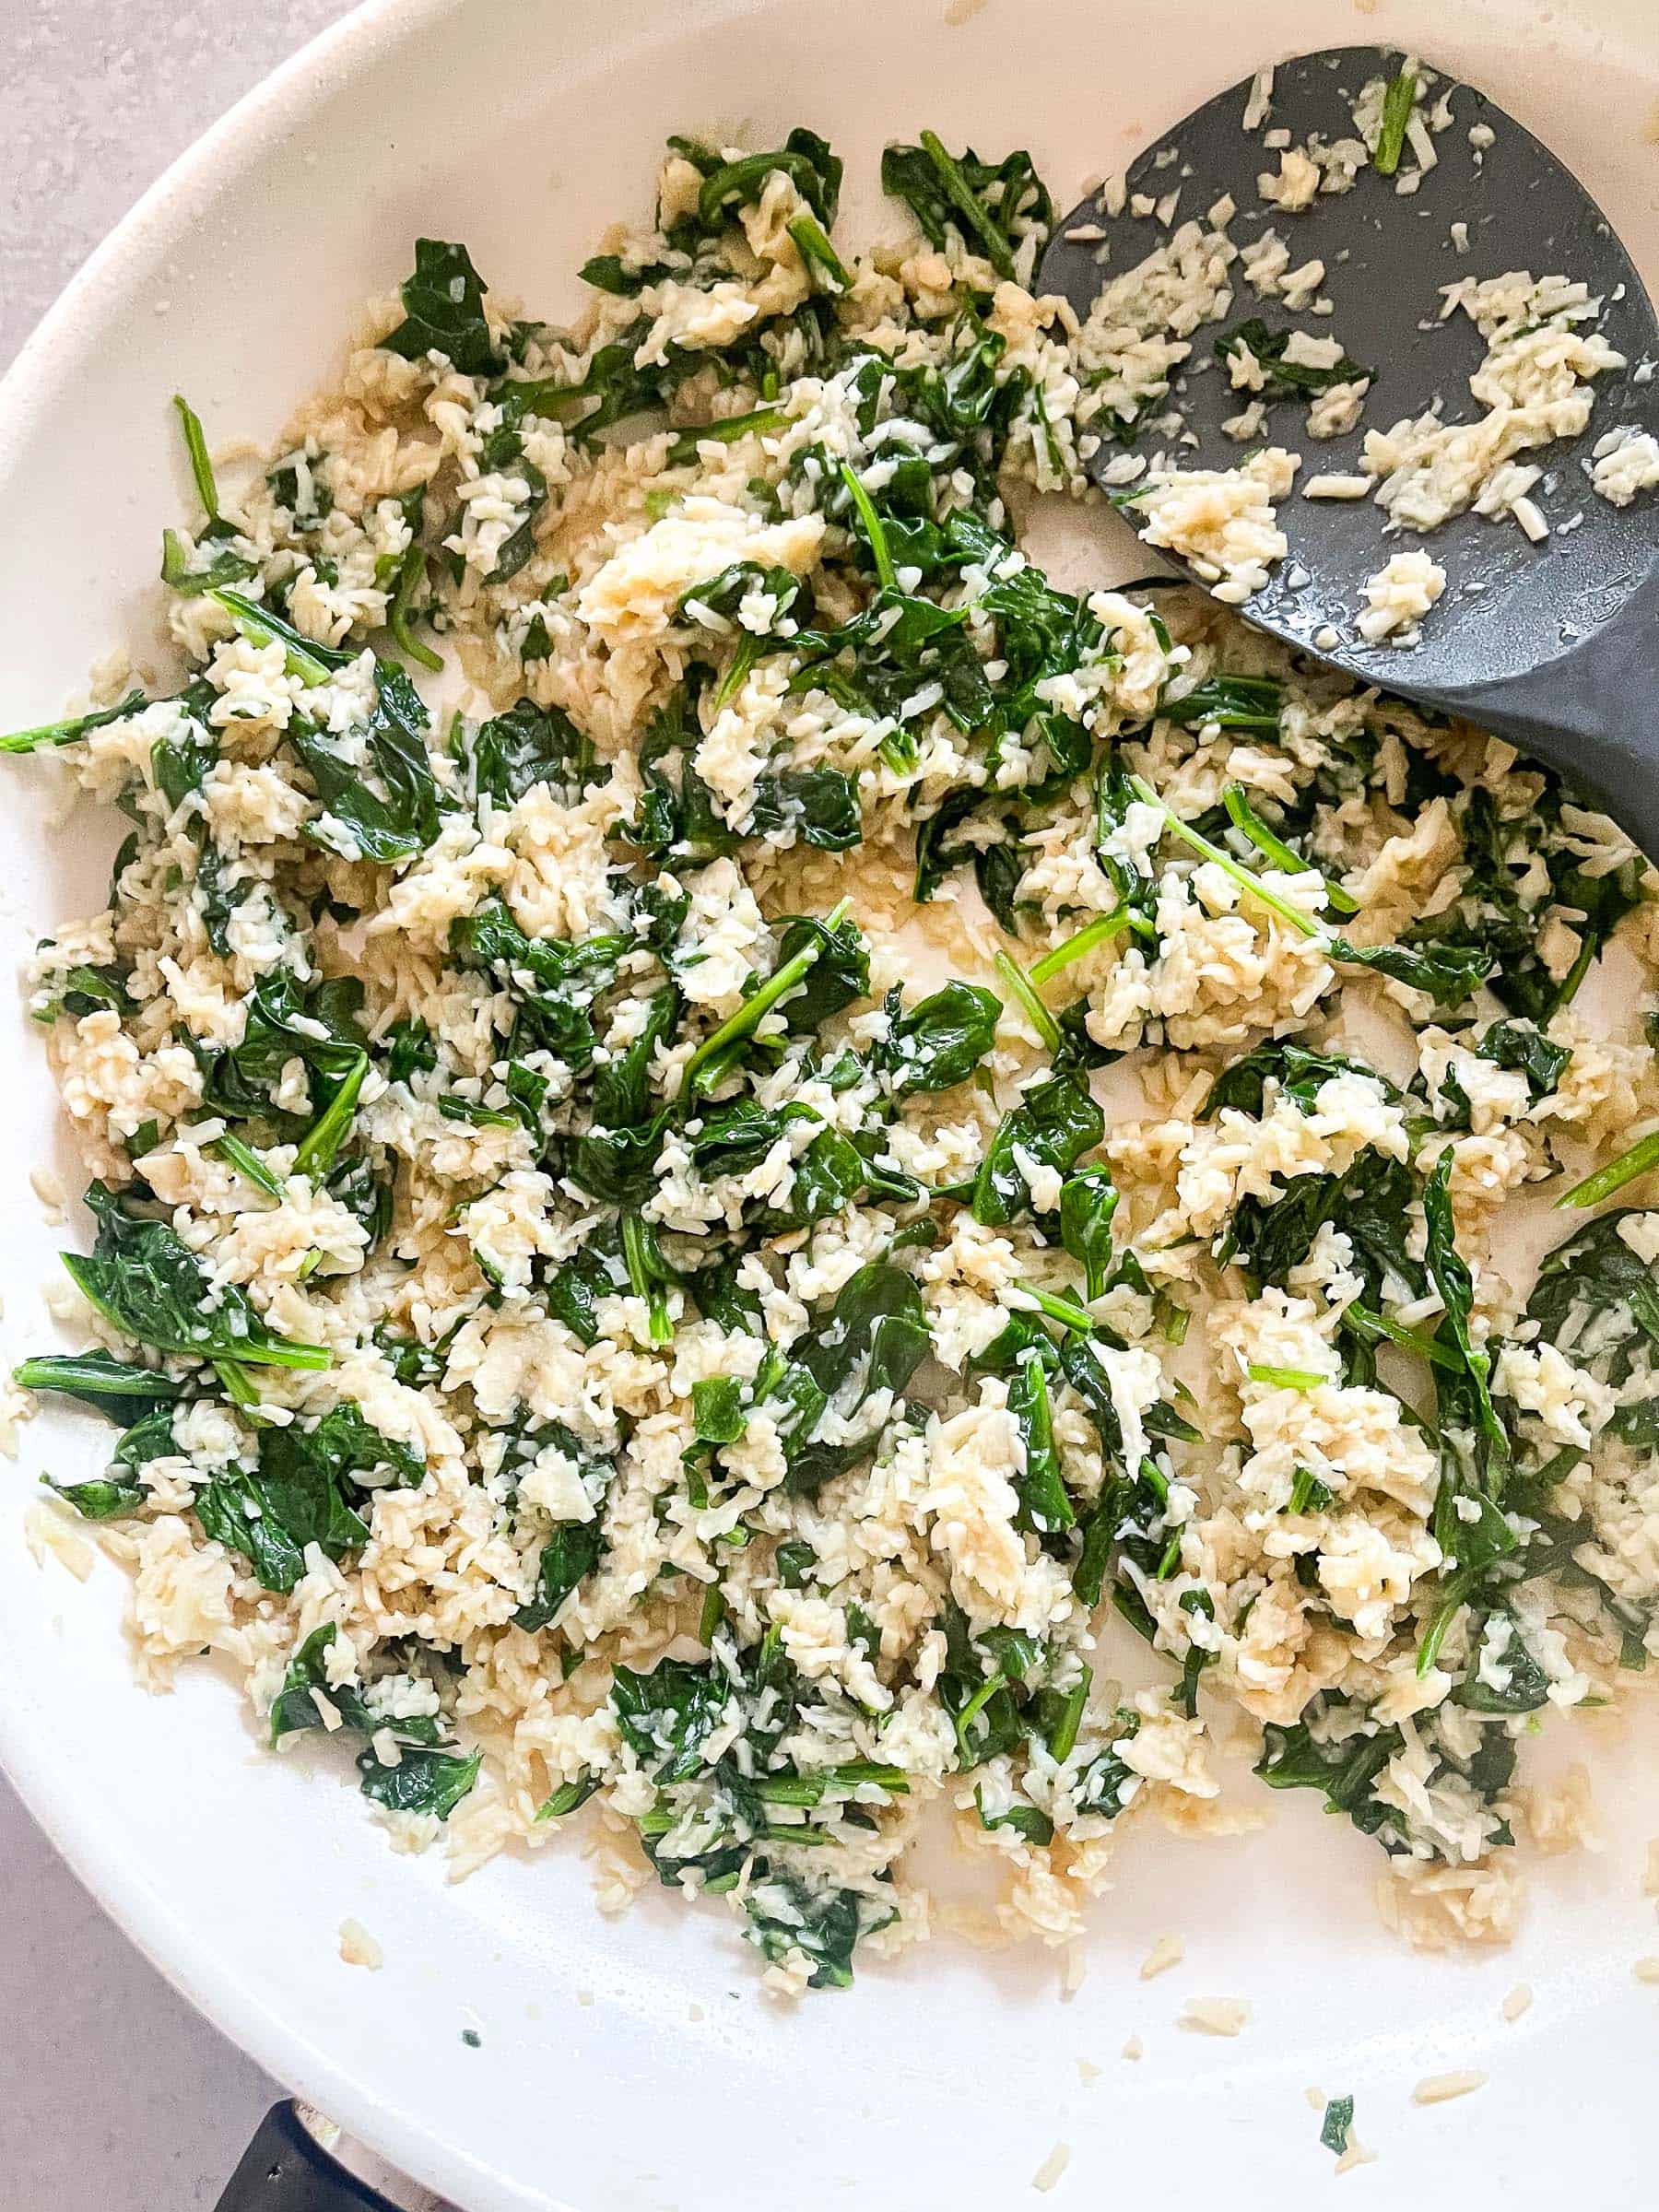 spinach and hearts of palm rice in a white bowl with a silver spoon